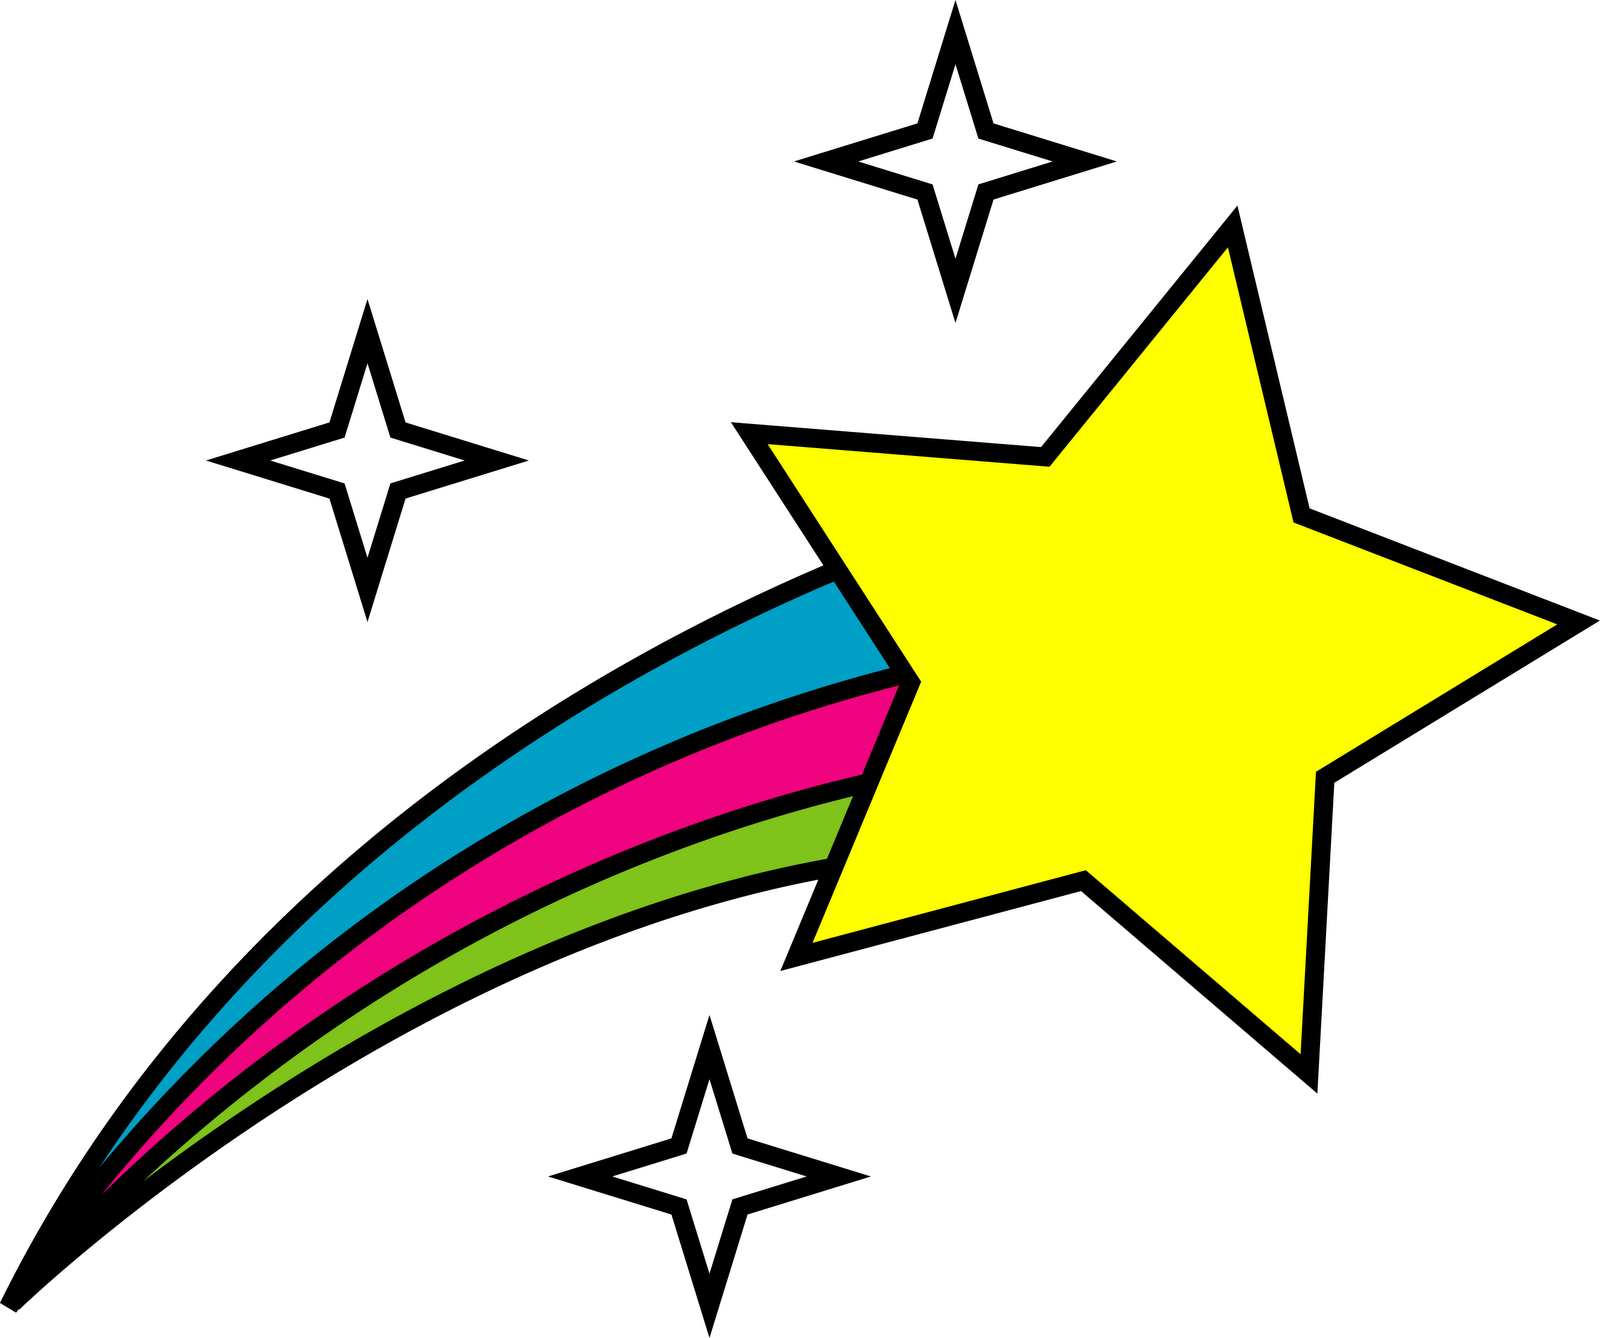 Shooting Stars Drawing - Clipart library